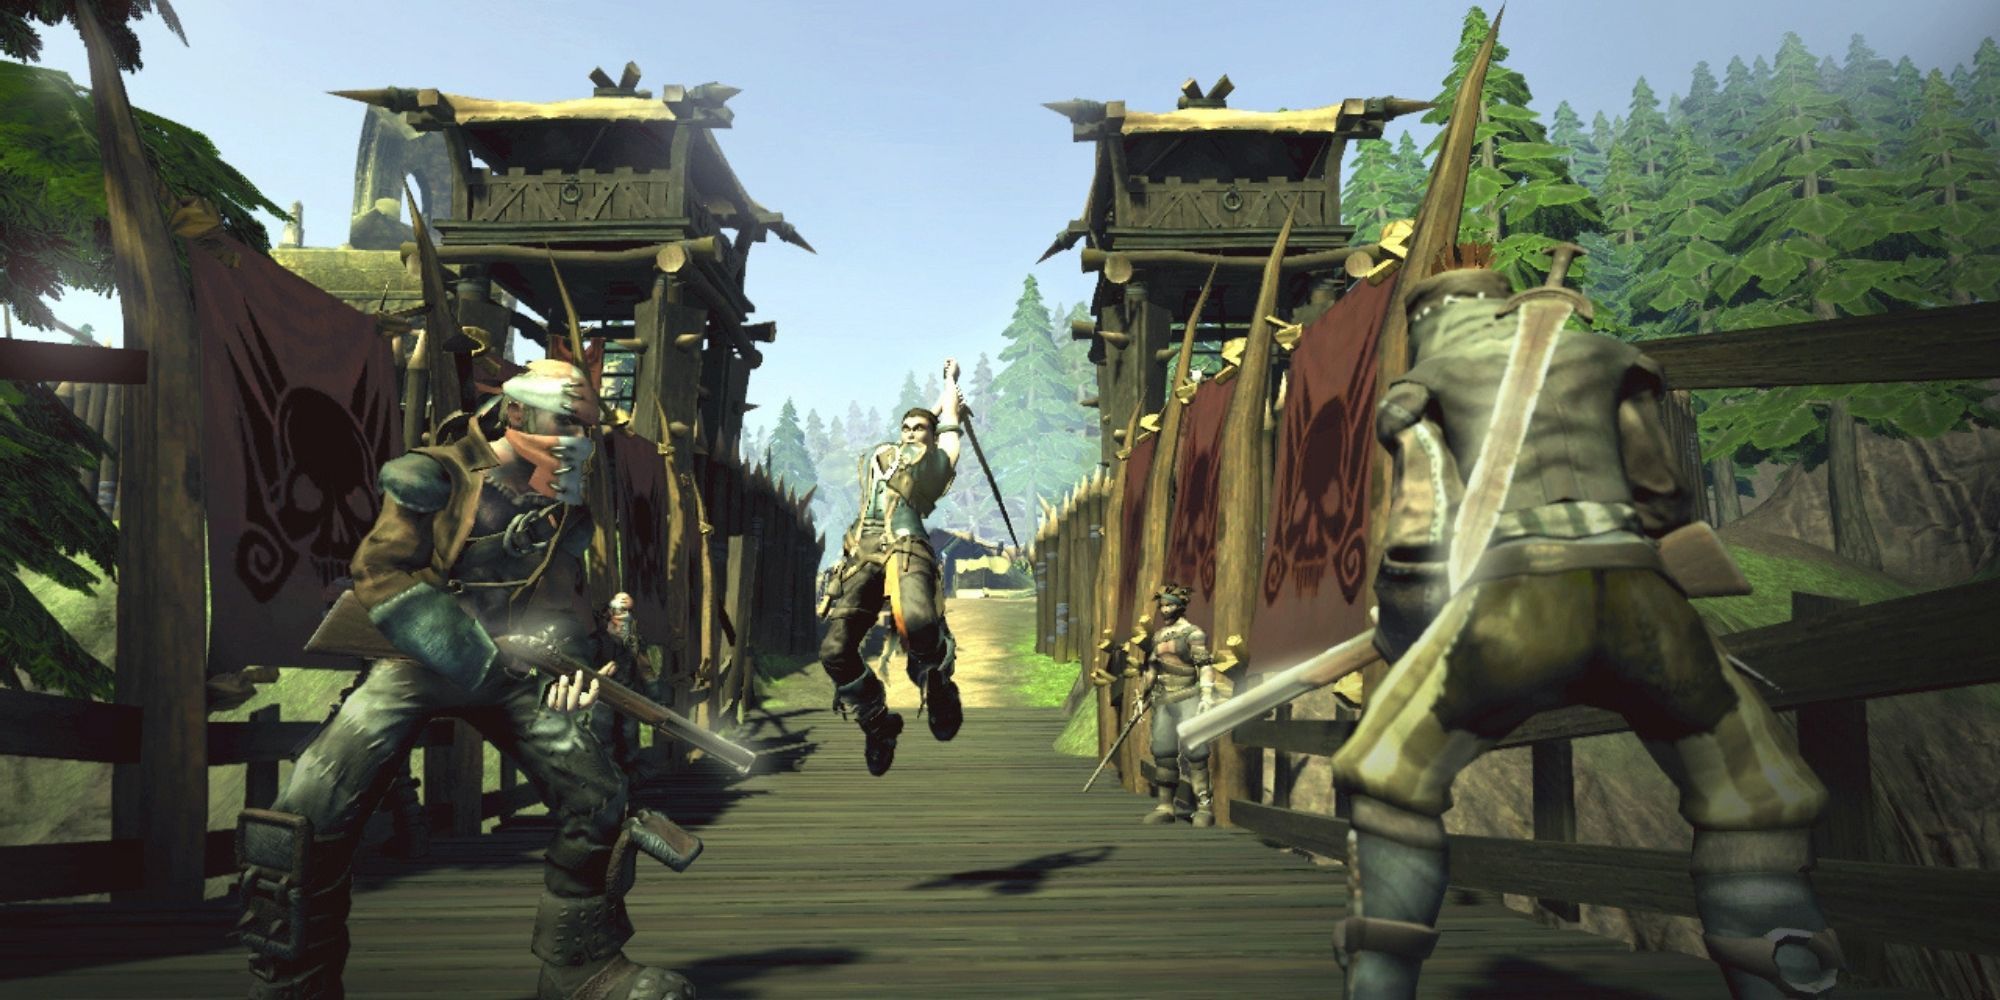 Fable II - The protagonist attacking enemies on a bridge